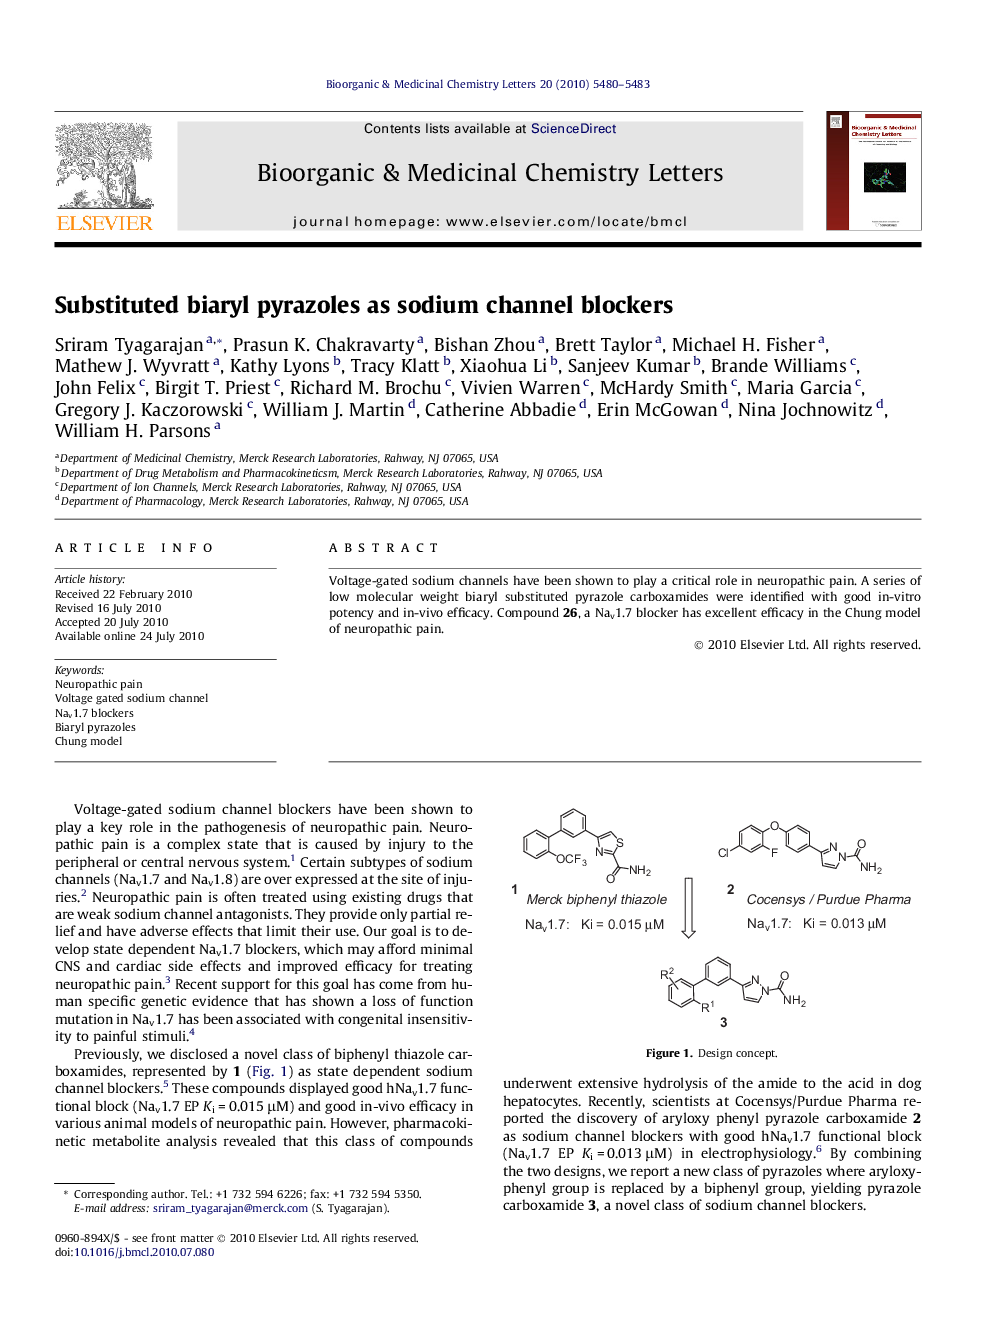 Substituted biaryl pyrazoles as sodium channel blockers